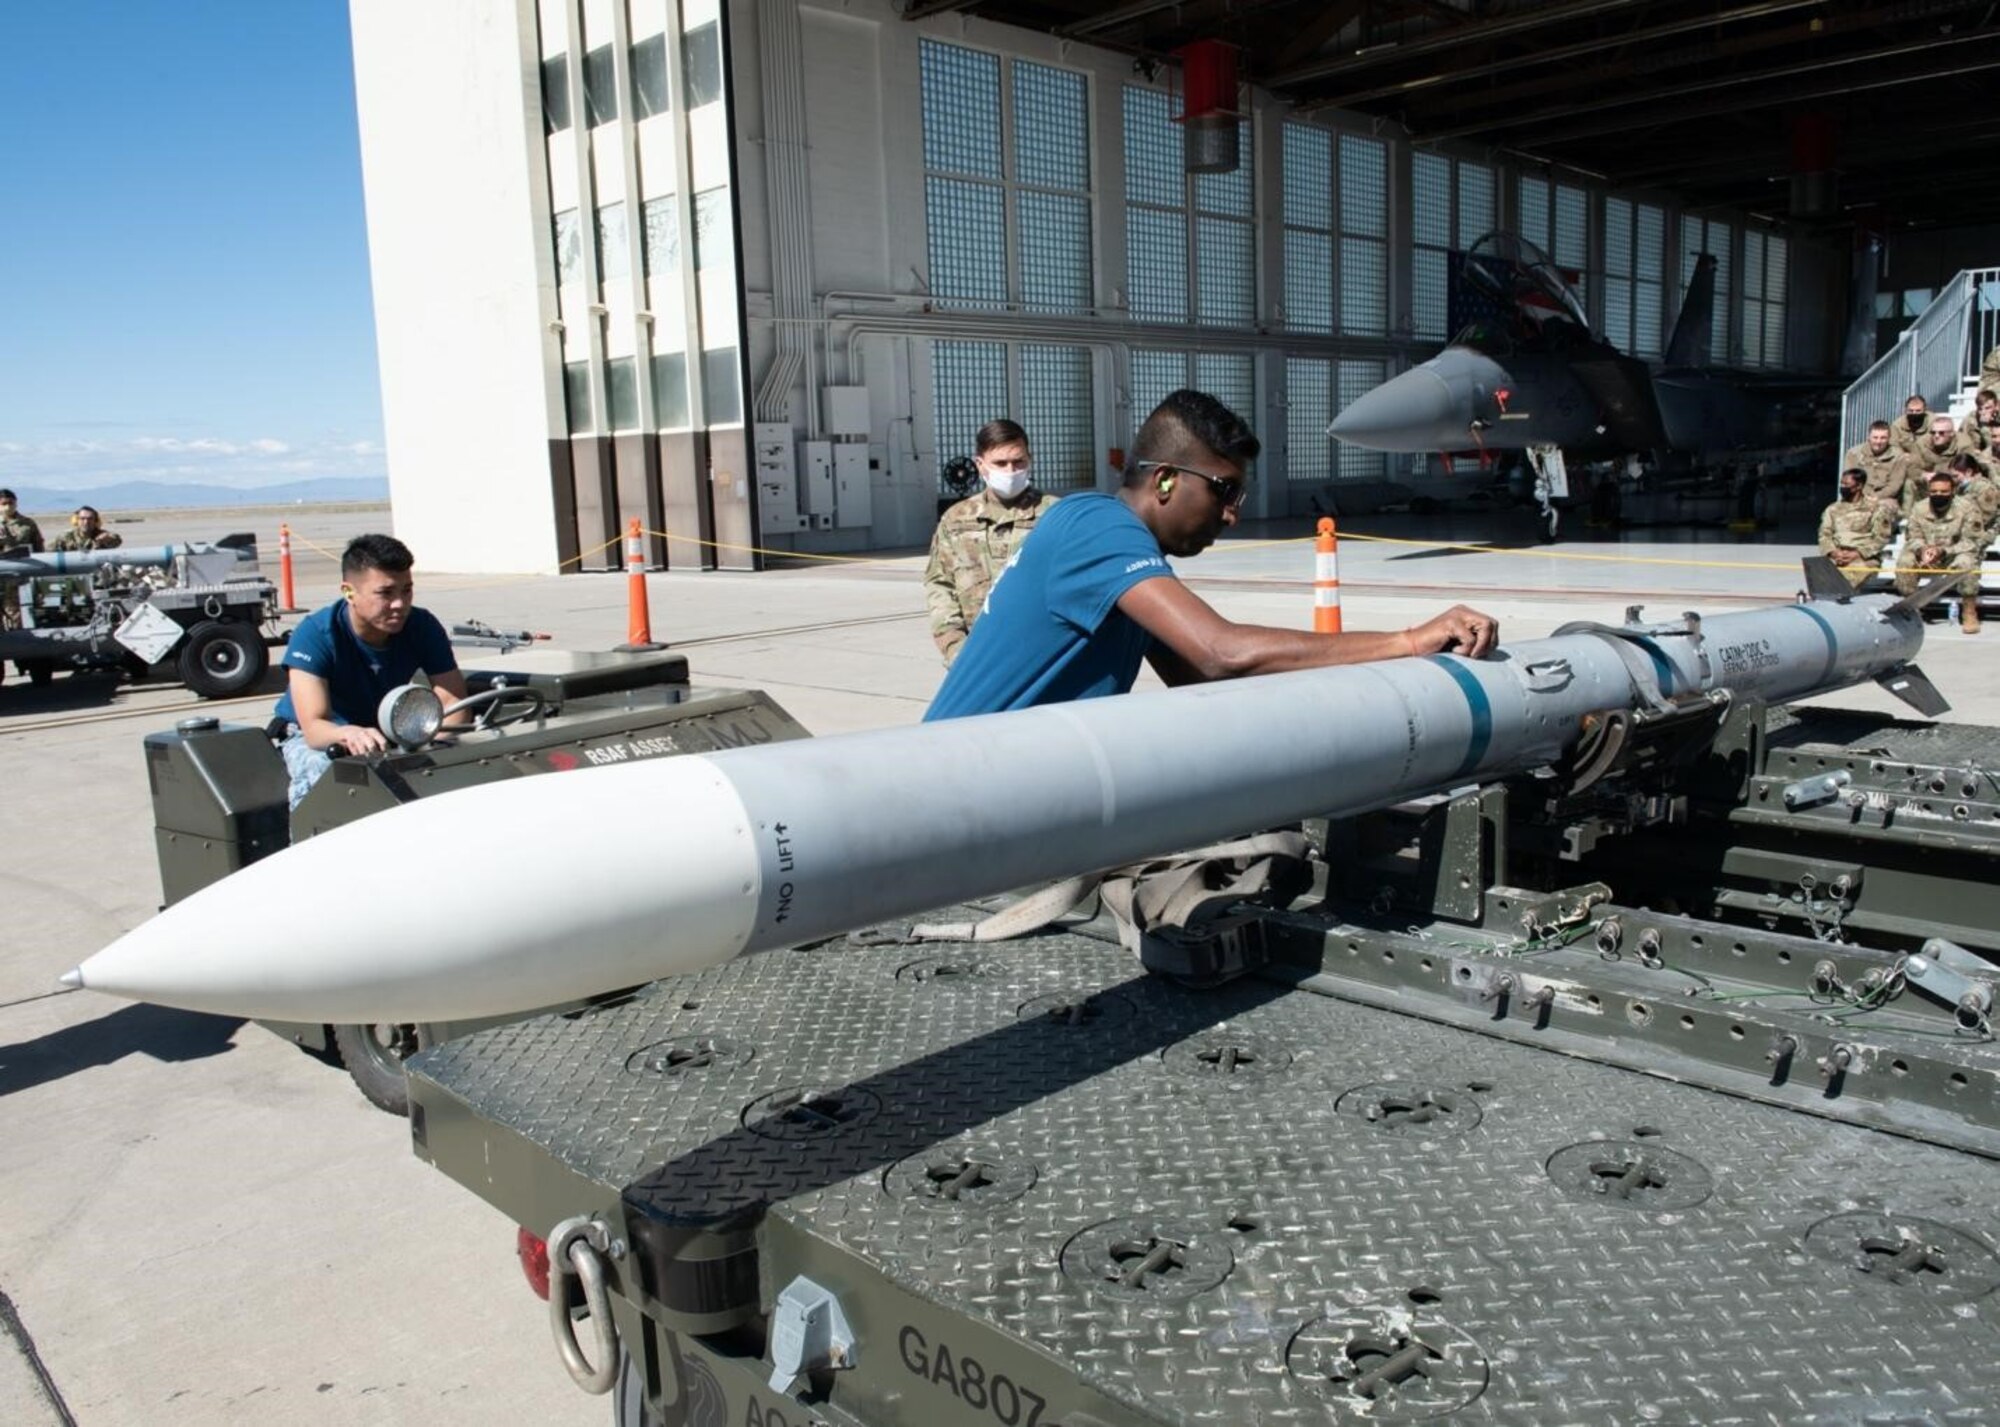 A Airman from the Republic of Singapore Air Force removes straps off an Air Intercept Missile.